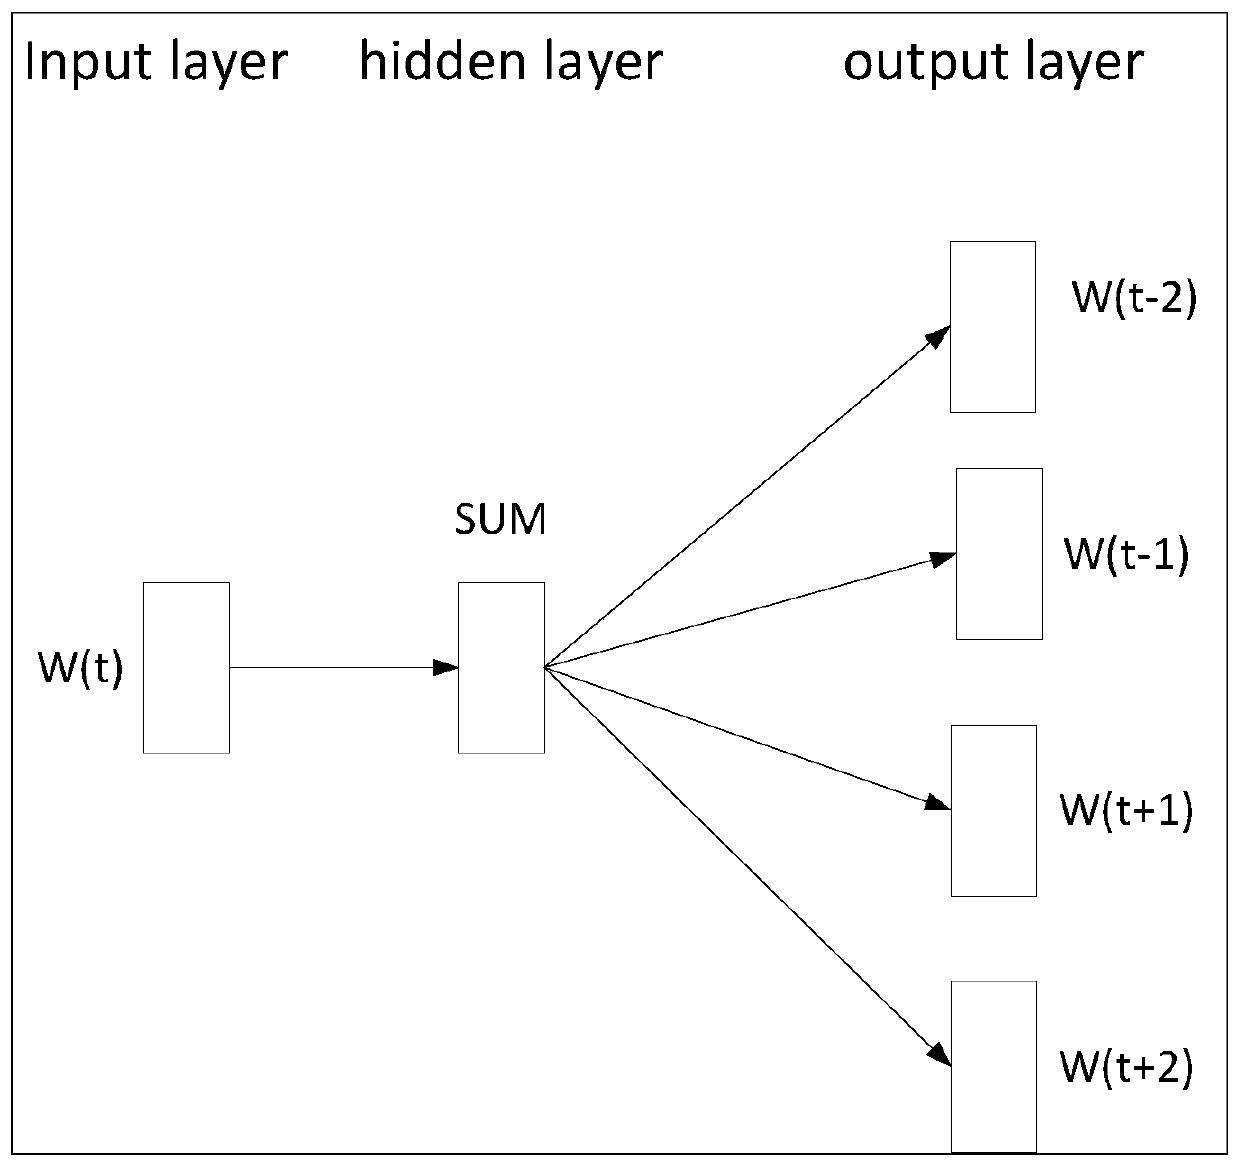 Court similar case recommendation model based on word vectors and word frequencies